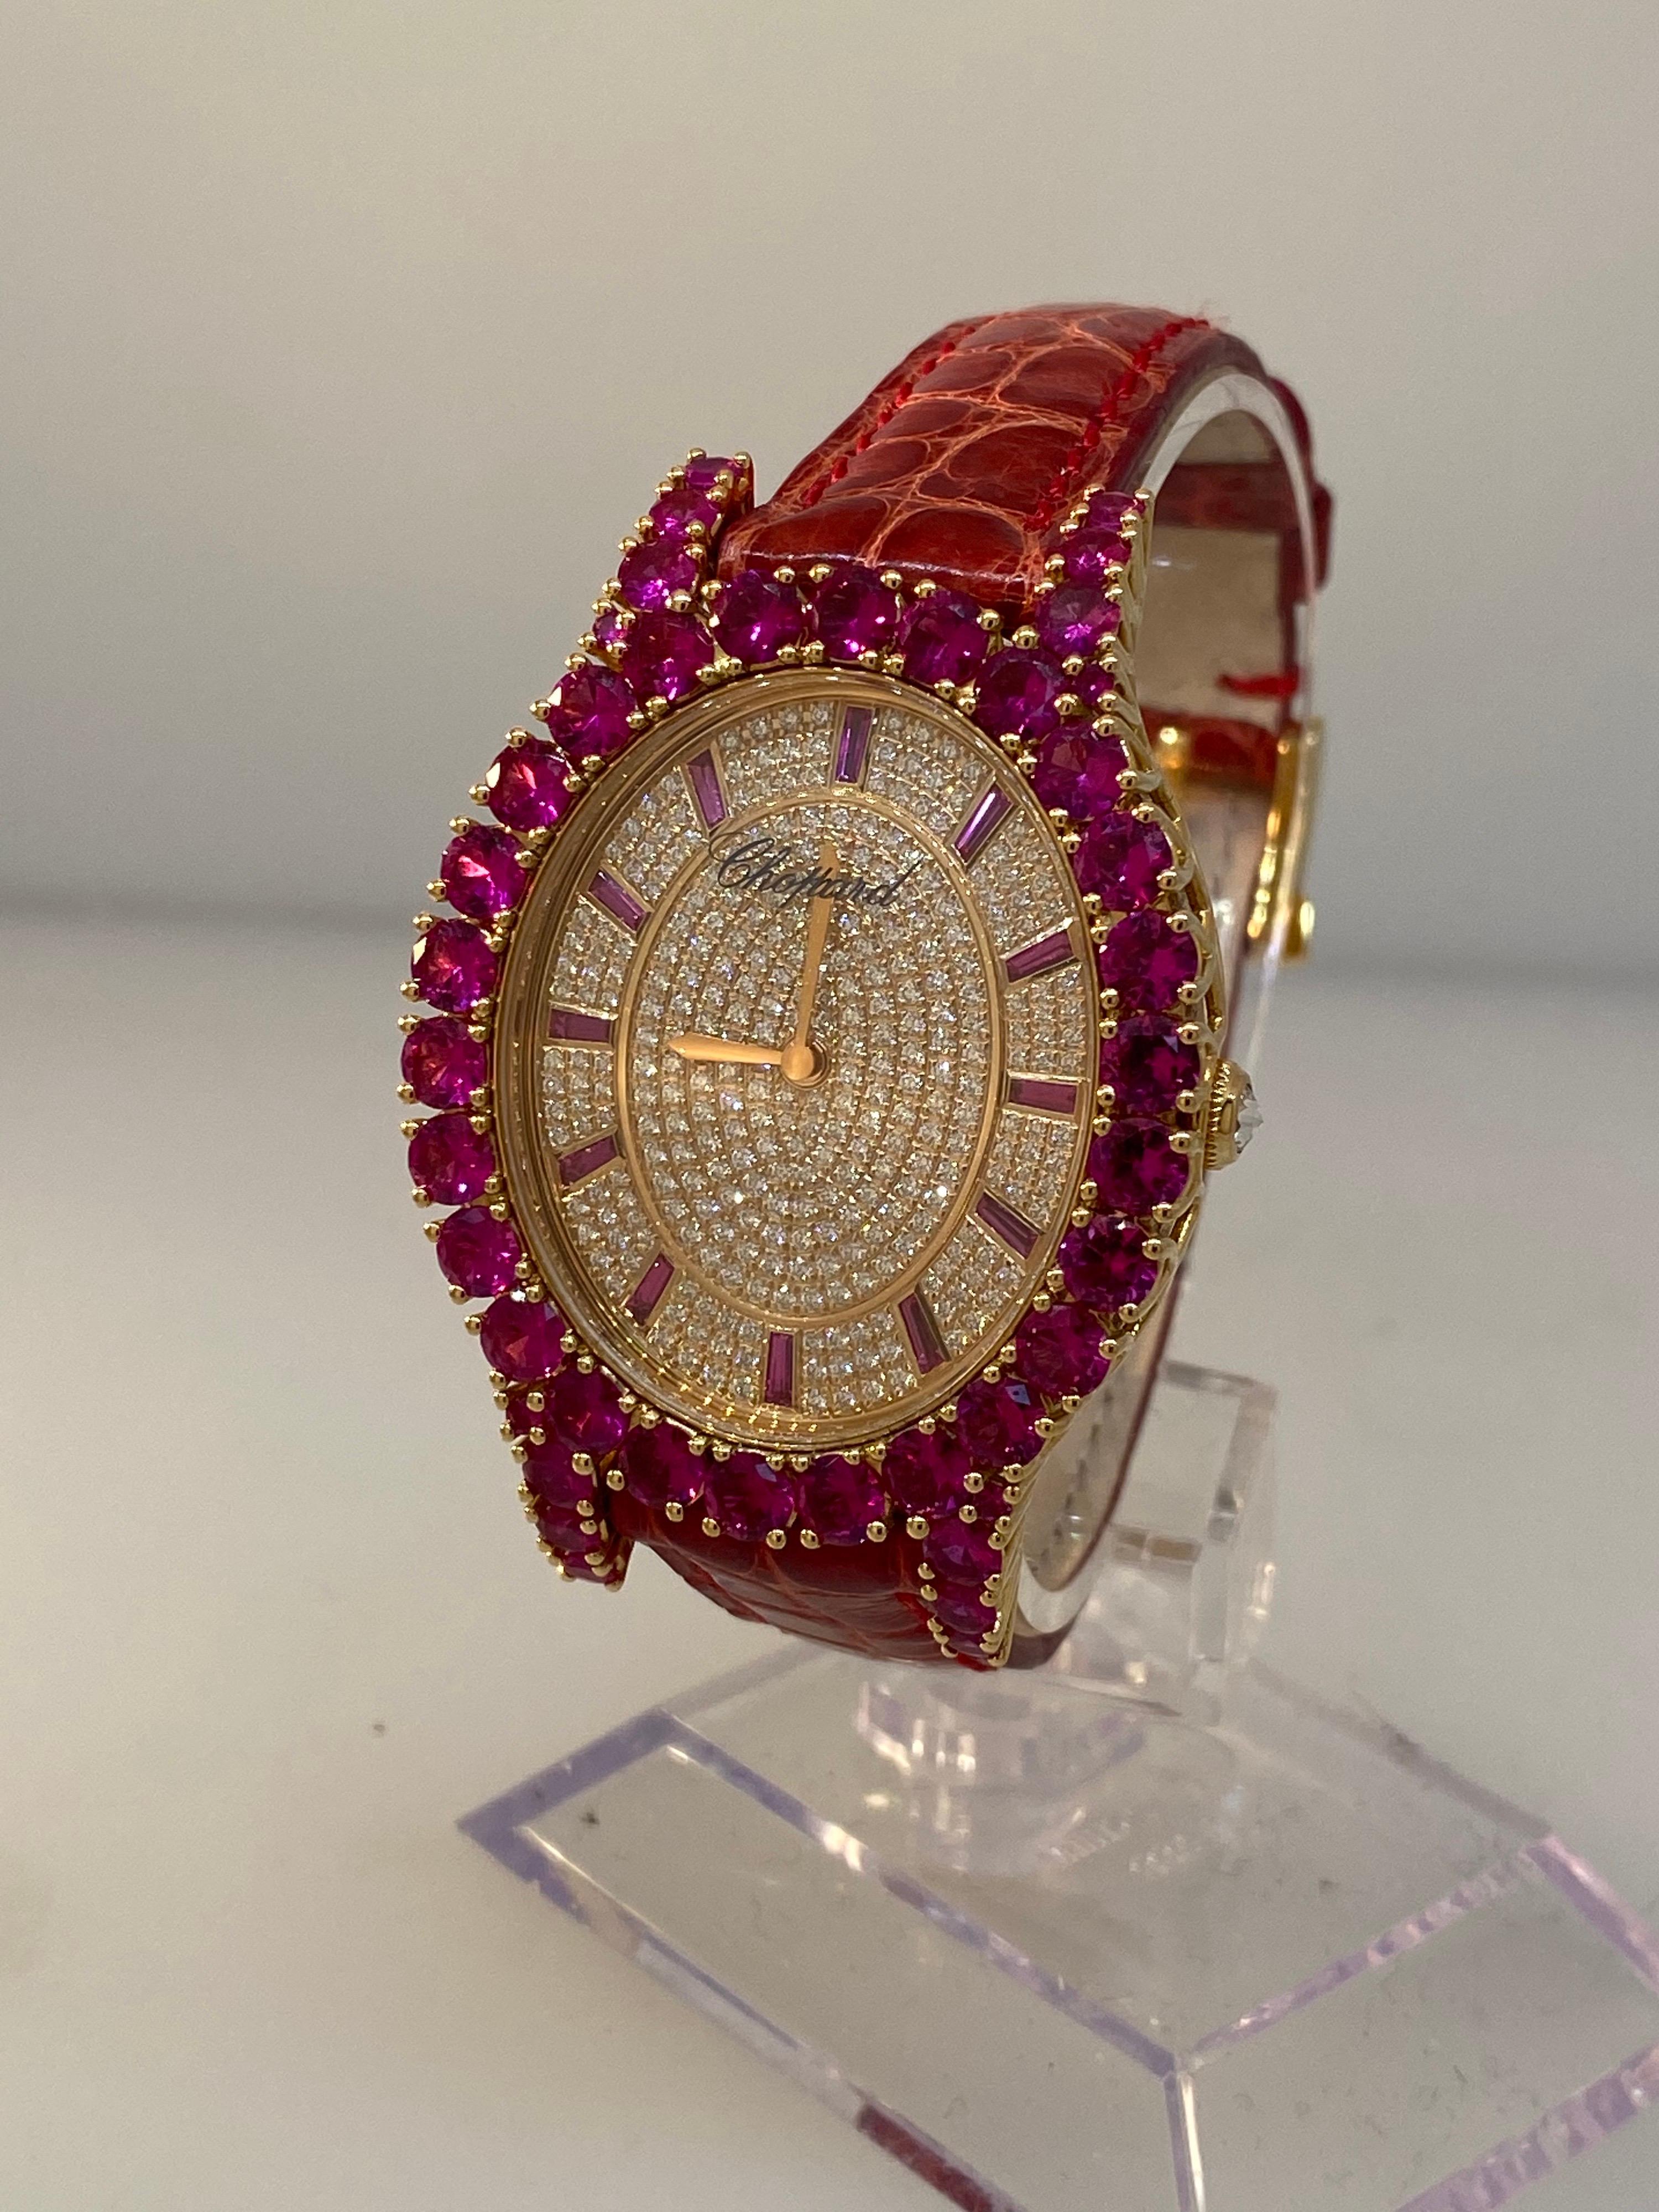 Chopard Heure du Diamant Ladies Watch

Model Number: 13/9383-5045

100% Authentic

Brand New

Comes with original Chopard box, certificate of authenticity and warranty and instruction manual

18 Karat Rose Gold Case 

Scratch Resistant Sapphire